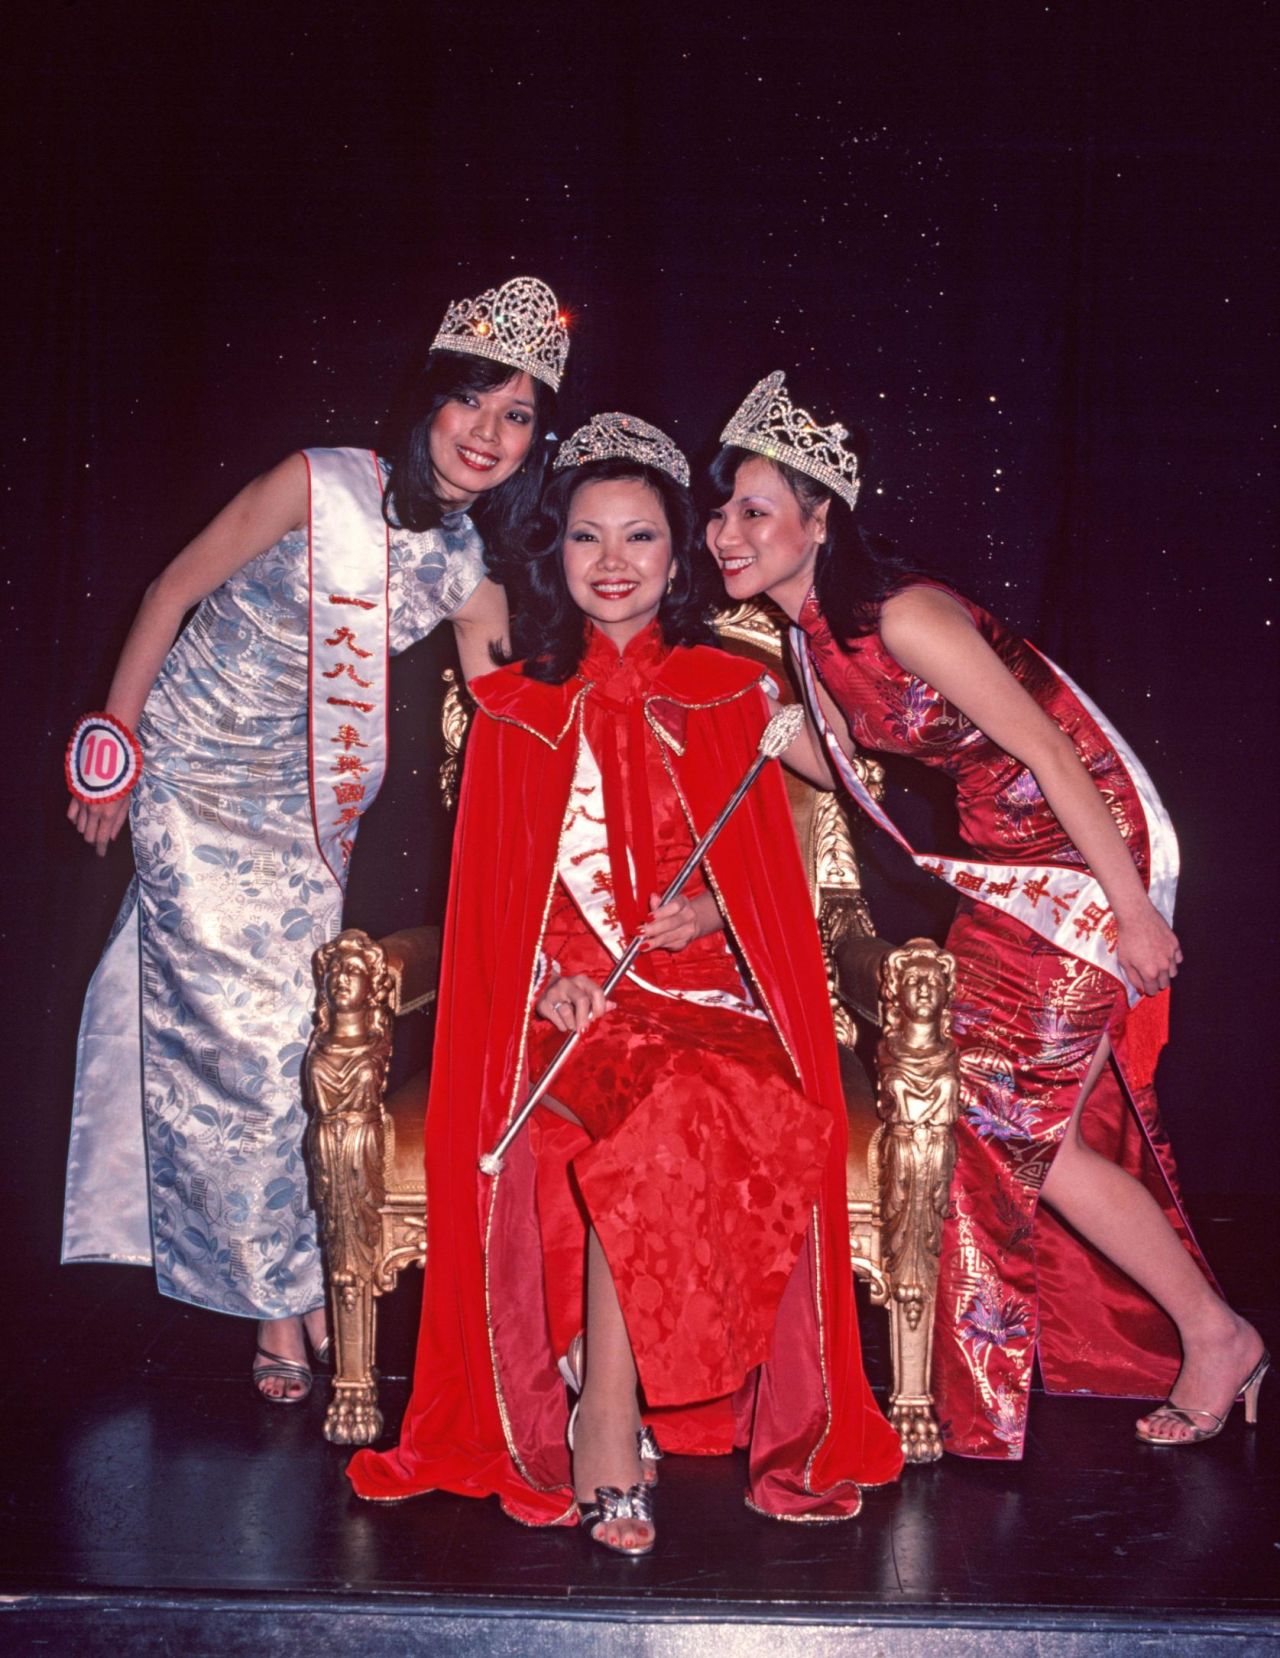 The appeal of Miss Chinatown was far-reaching and even extended across the pond. Pageant contestants from London are pictured here during the 1980s.